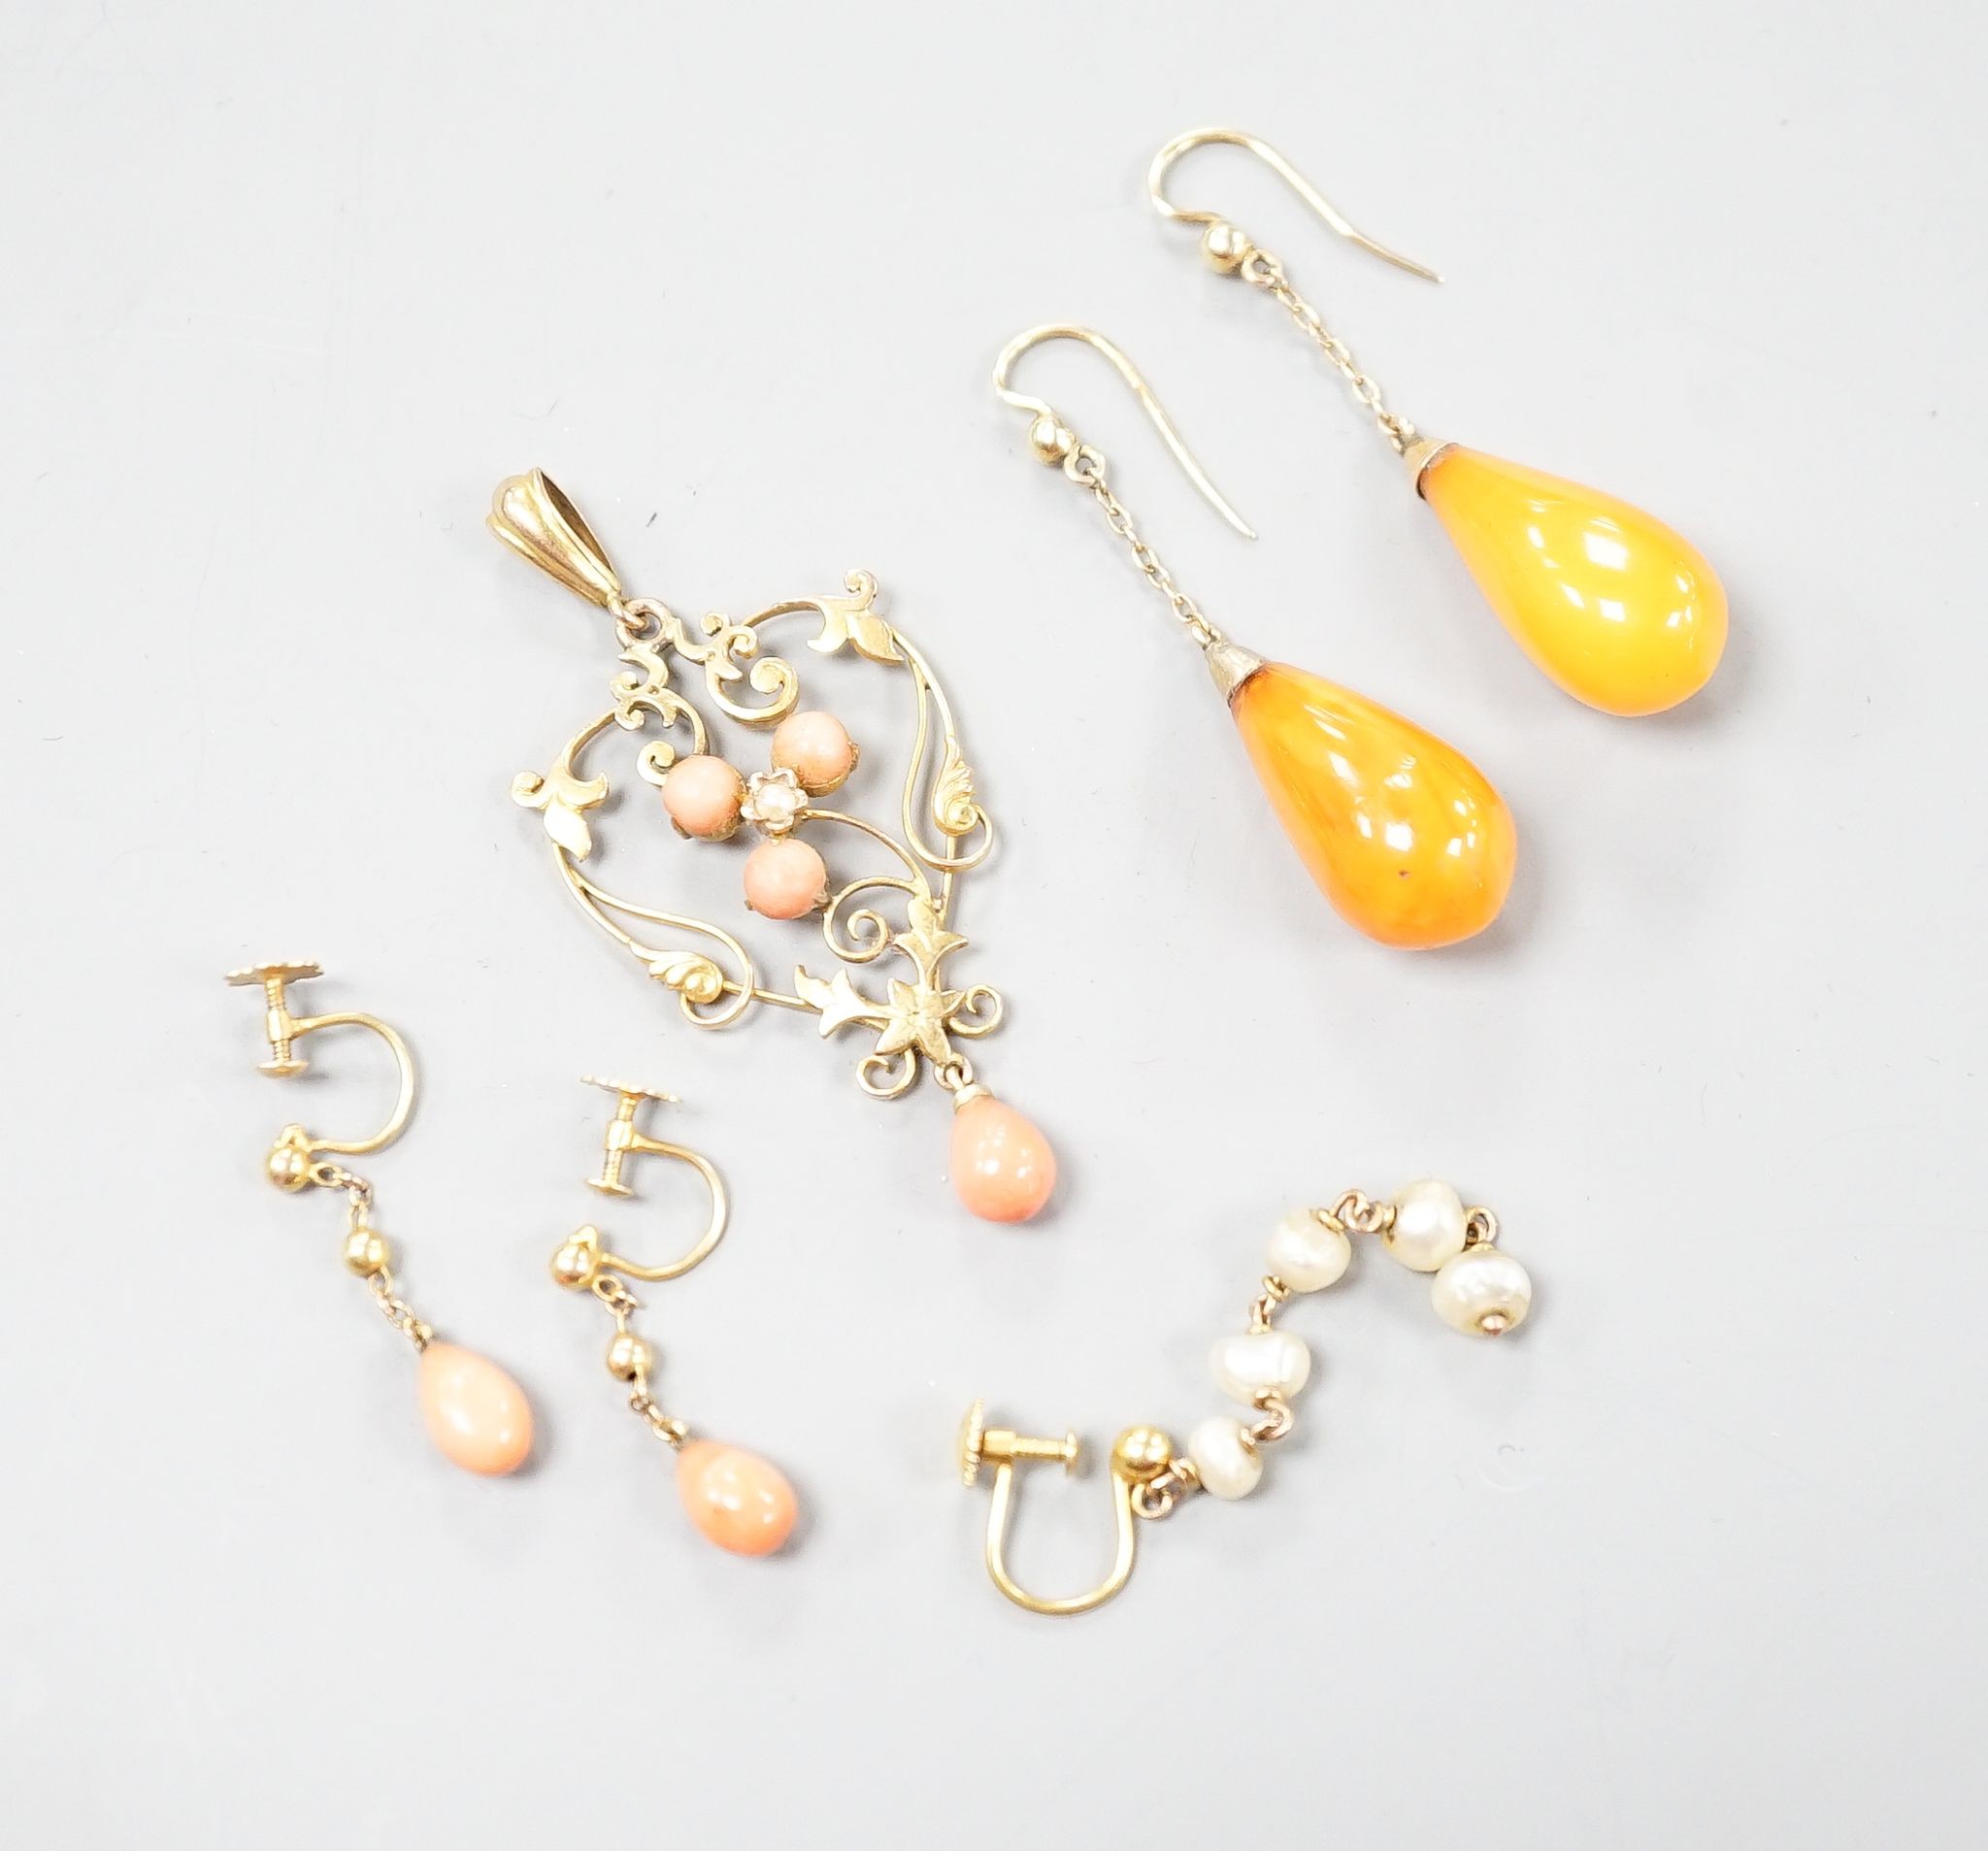 A gold and coral mounted pendant and coral earrings and a pair of amber and gold earrings